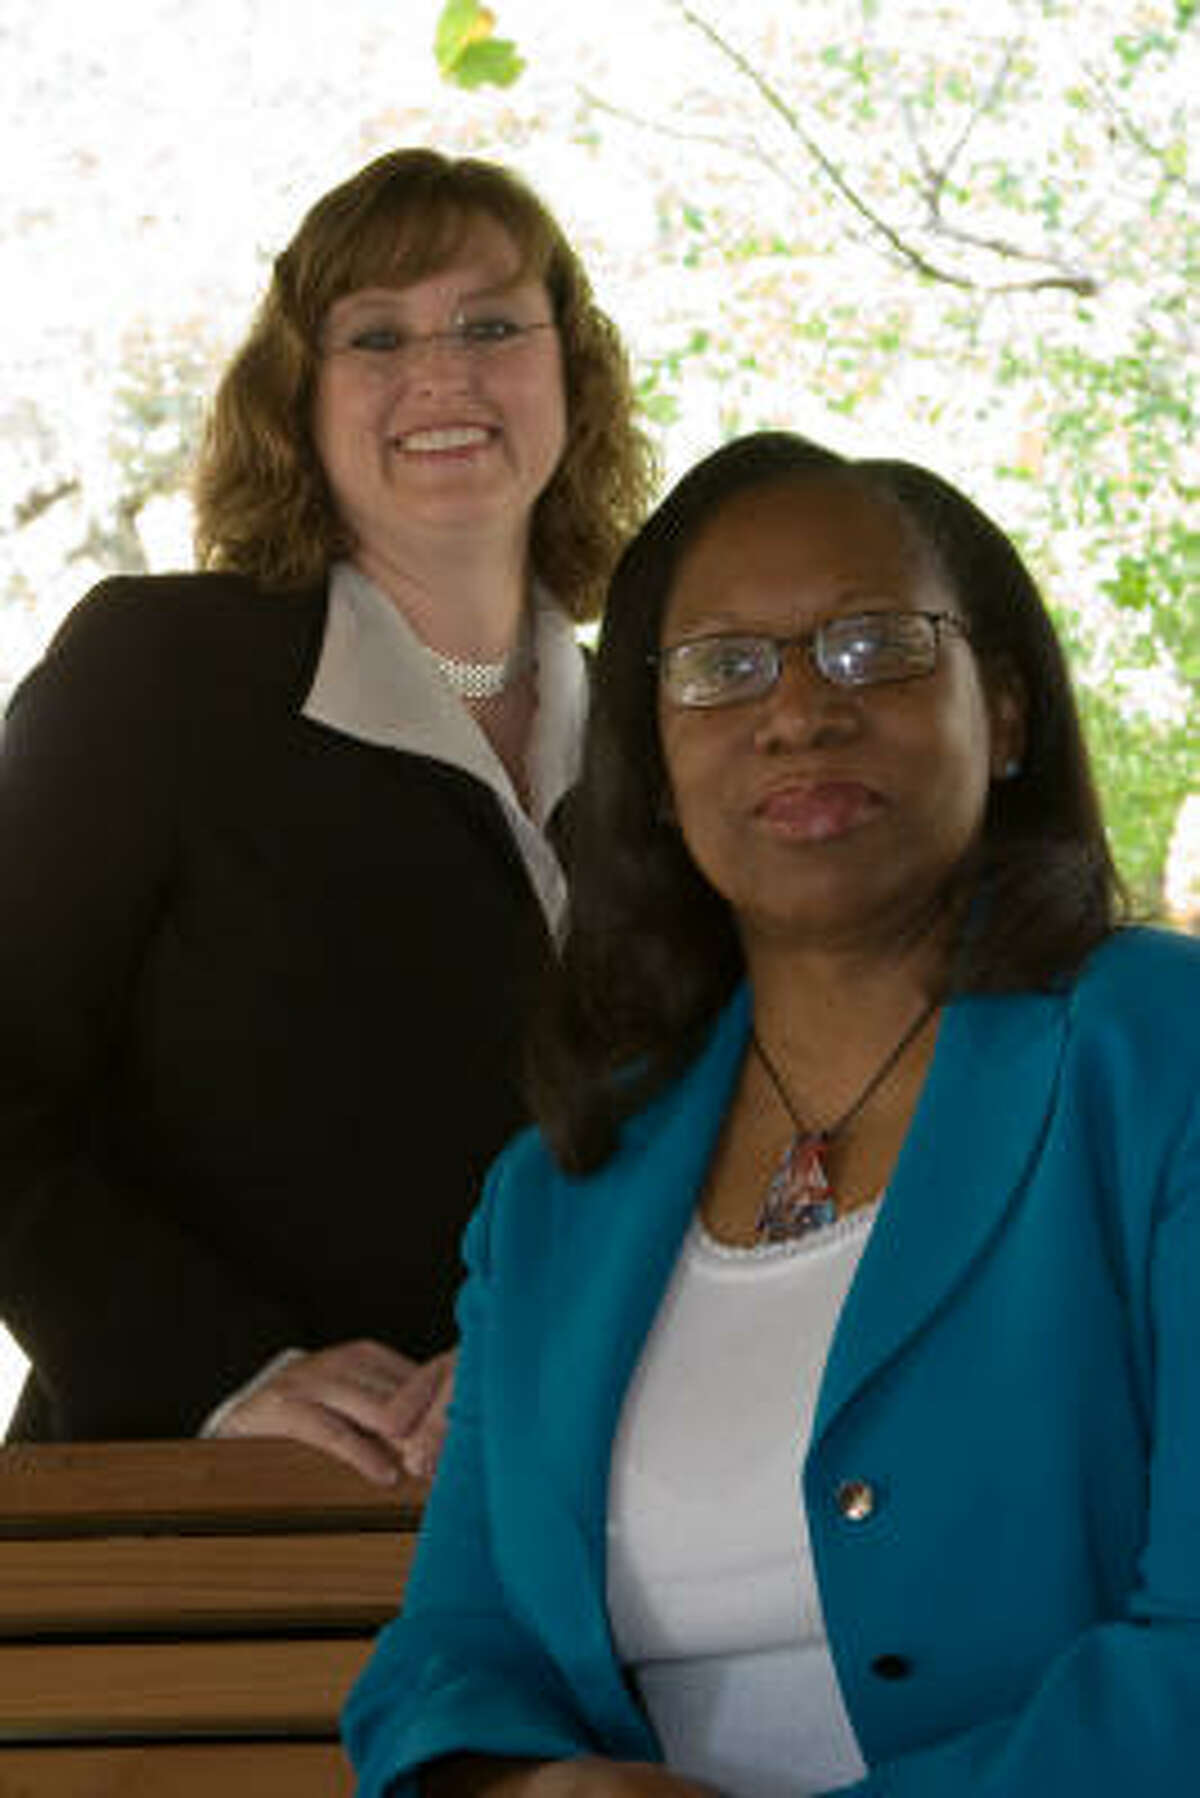 Kim Williamson, back, medicine department administrator in the Gynecologic Medical Oncology Department, and Markettea Beneke, senior department administrator in the Neuro-Oncology Department, have become fast friends as well as colleagues at M D Anderson Cancer Center.